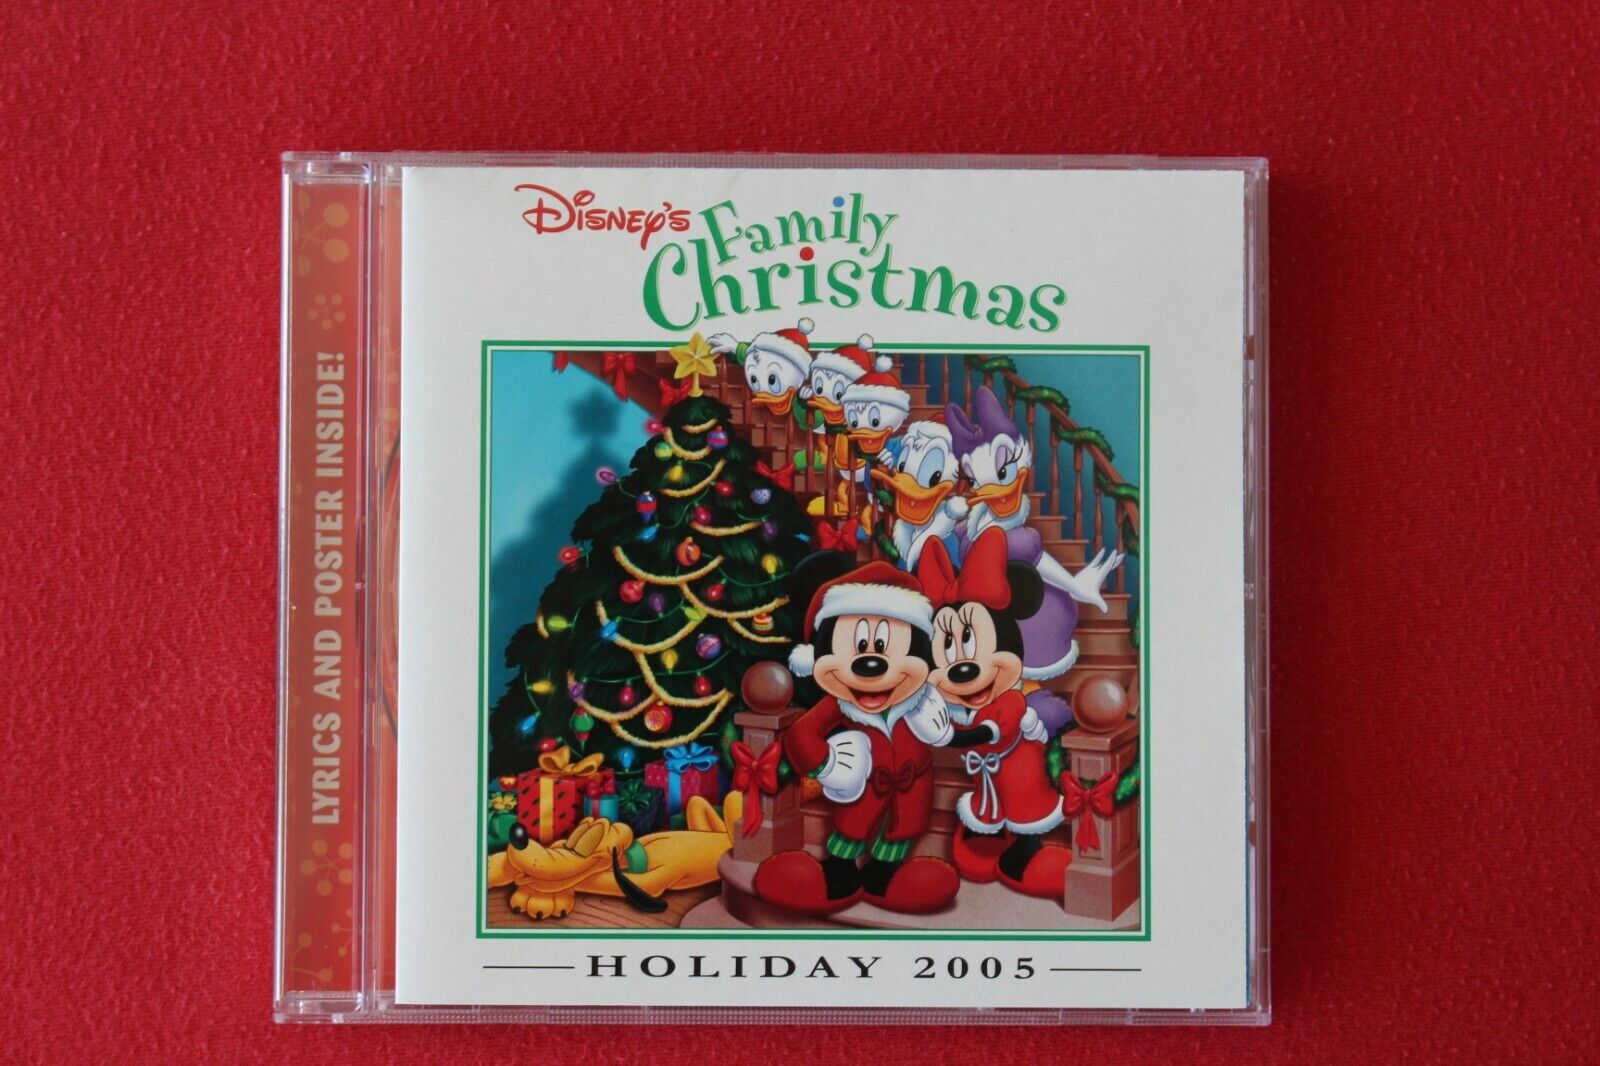 Disney\'s Family Christmas - Holiday 2005 - US CD in Good Condition - 